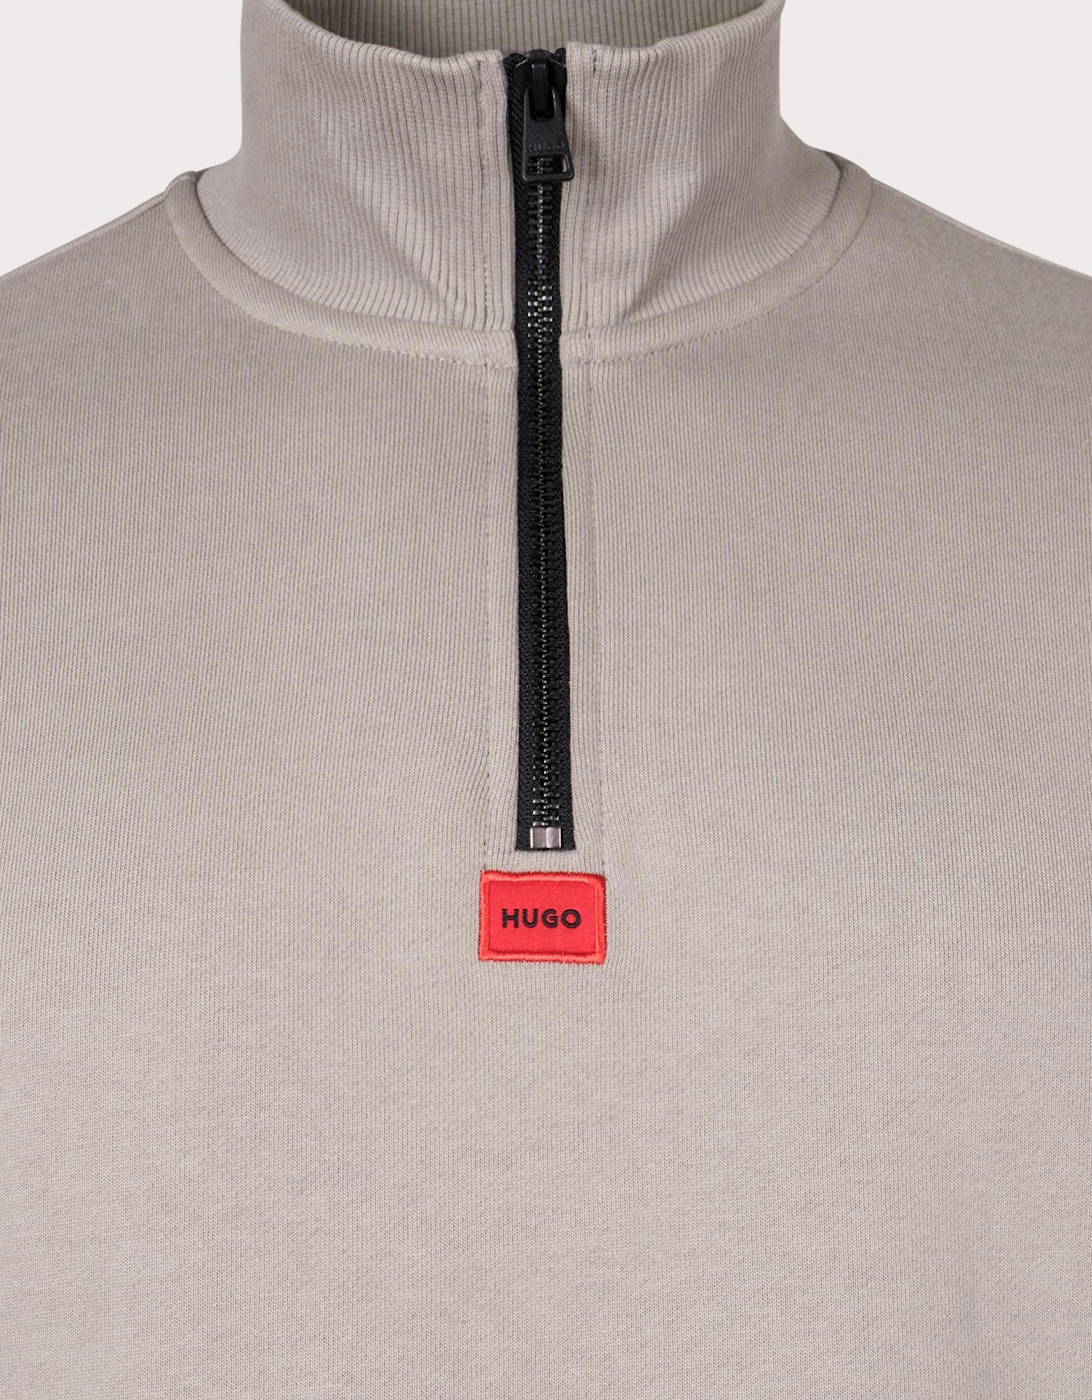 Relaxed Fit Durty Quarter Zip Sweatshirt